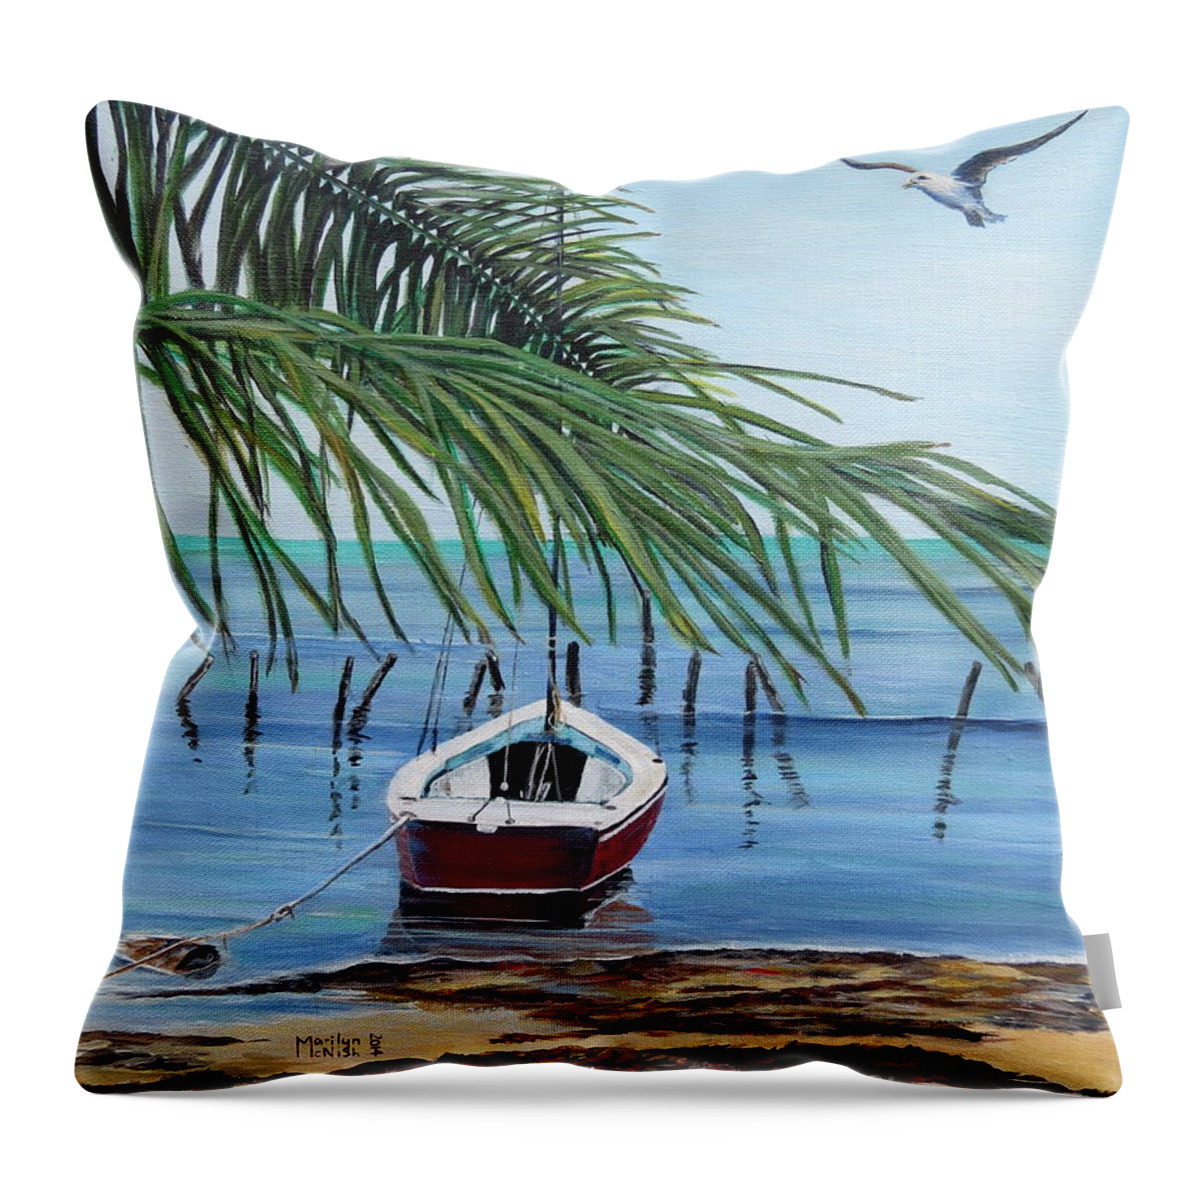 Caye Caulker Throw Pillow featuring the painting Tides Out by Marilyn McNish